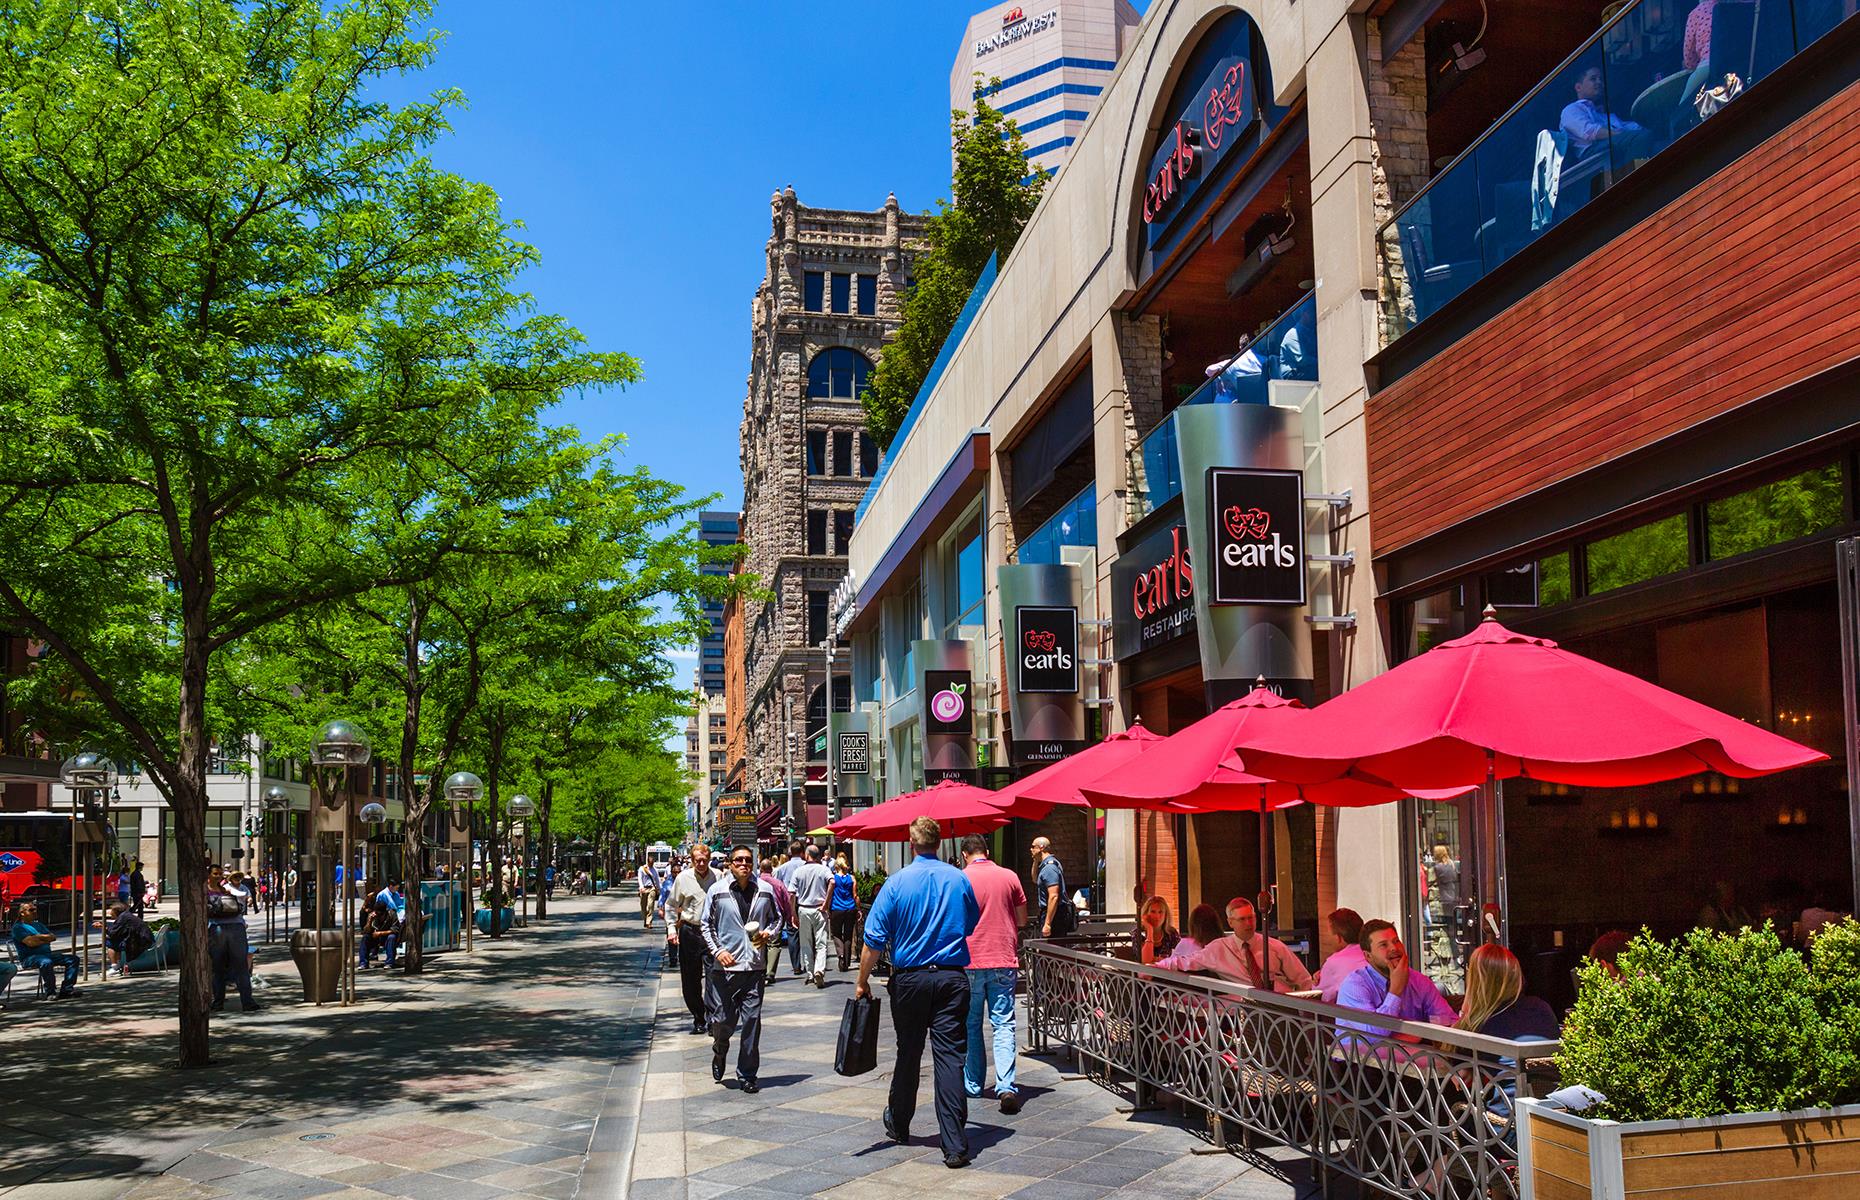 <p>Boasting a rich cultural scene with attractions to spare, <a href="http://www.loveexploring.com/news/144518/48-hours-in-denver-colorado">Denver</a> is perfectly placed for weekend breaks, especially for car-less travelers. The 16th Street Mall is a mile-long pedestrian-friendly promenade through the heart of downtown, lined with more than 250 stores, restaurants and bars. Alternatively, hire bikes from BCycle and strike out into the suburbs, or take in the city's leafy parks along the Cherry Creek Trail and the South Platte River Trail.</p>  <p><a href="https://www.loveexploring.com/galleries/66970/us-cities-with-natural-wonders-on-their-doorstep?page=1"><strong>Now discover the US cities that have natural wonders on their doorstep</strong></a></p>